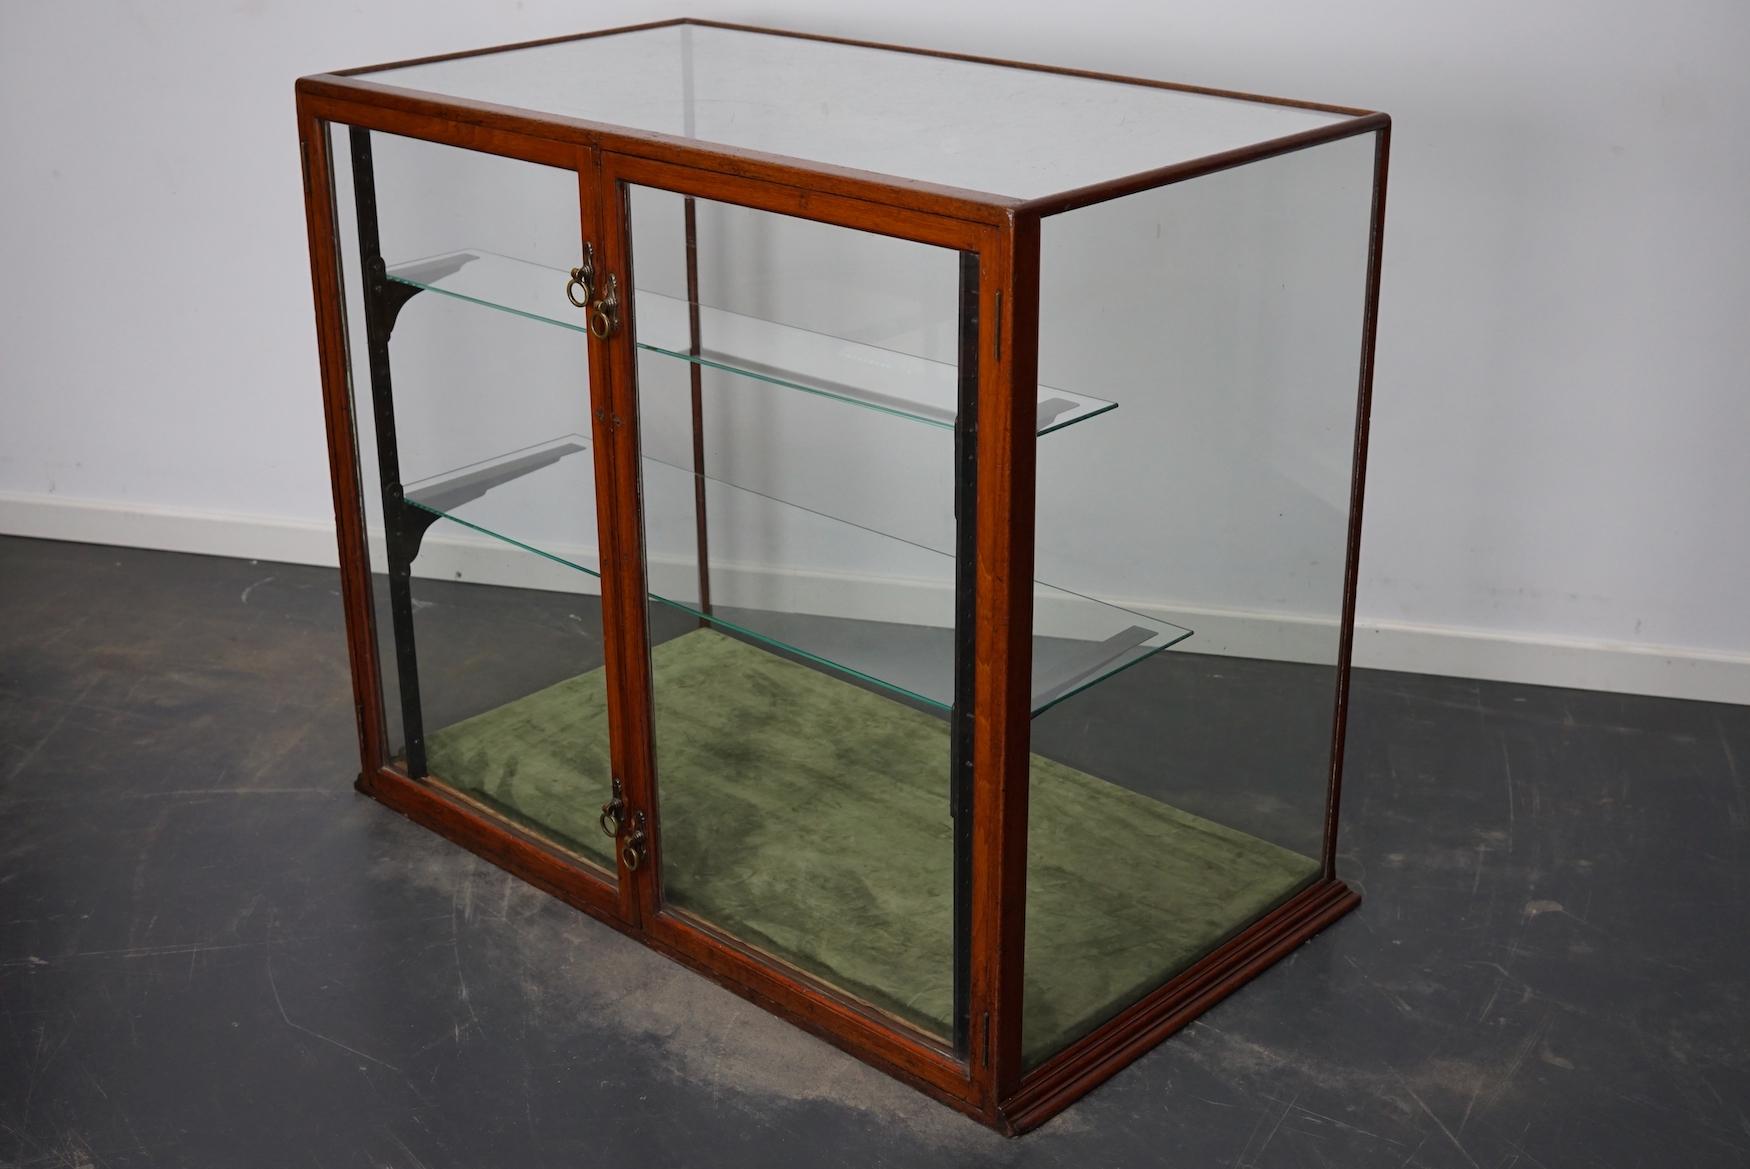 A museum quality Victorian mahogany display cabinet. This outstanding cabinet has two glass doors fitted with original knob handles. It features two shelves on cast iron shelve holders. The floor is covered with green velvet.